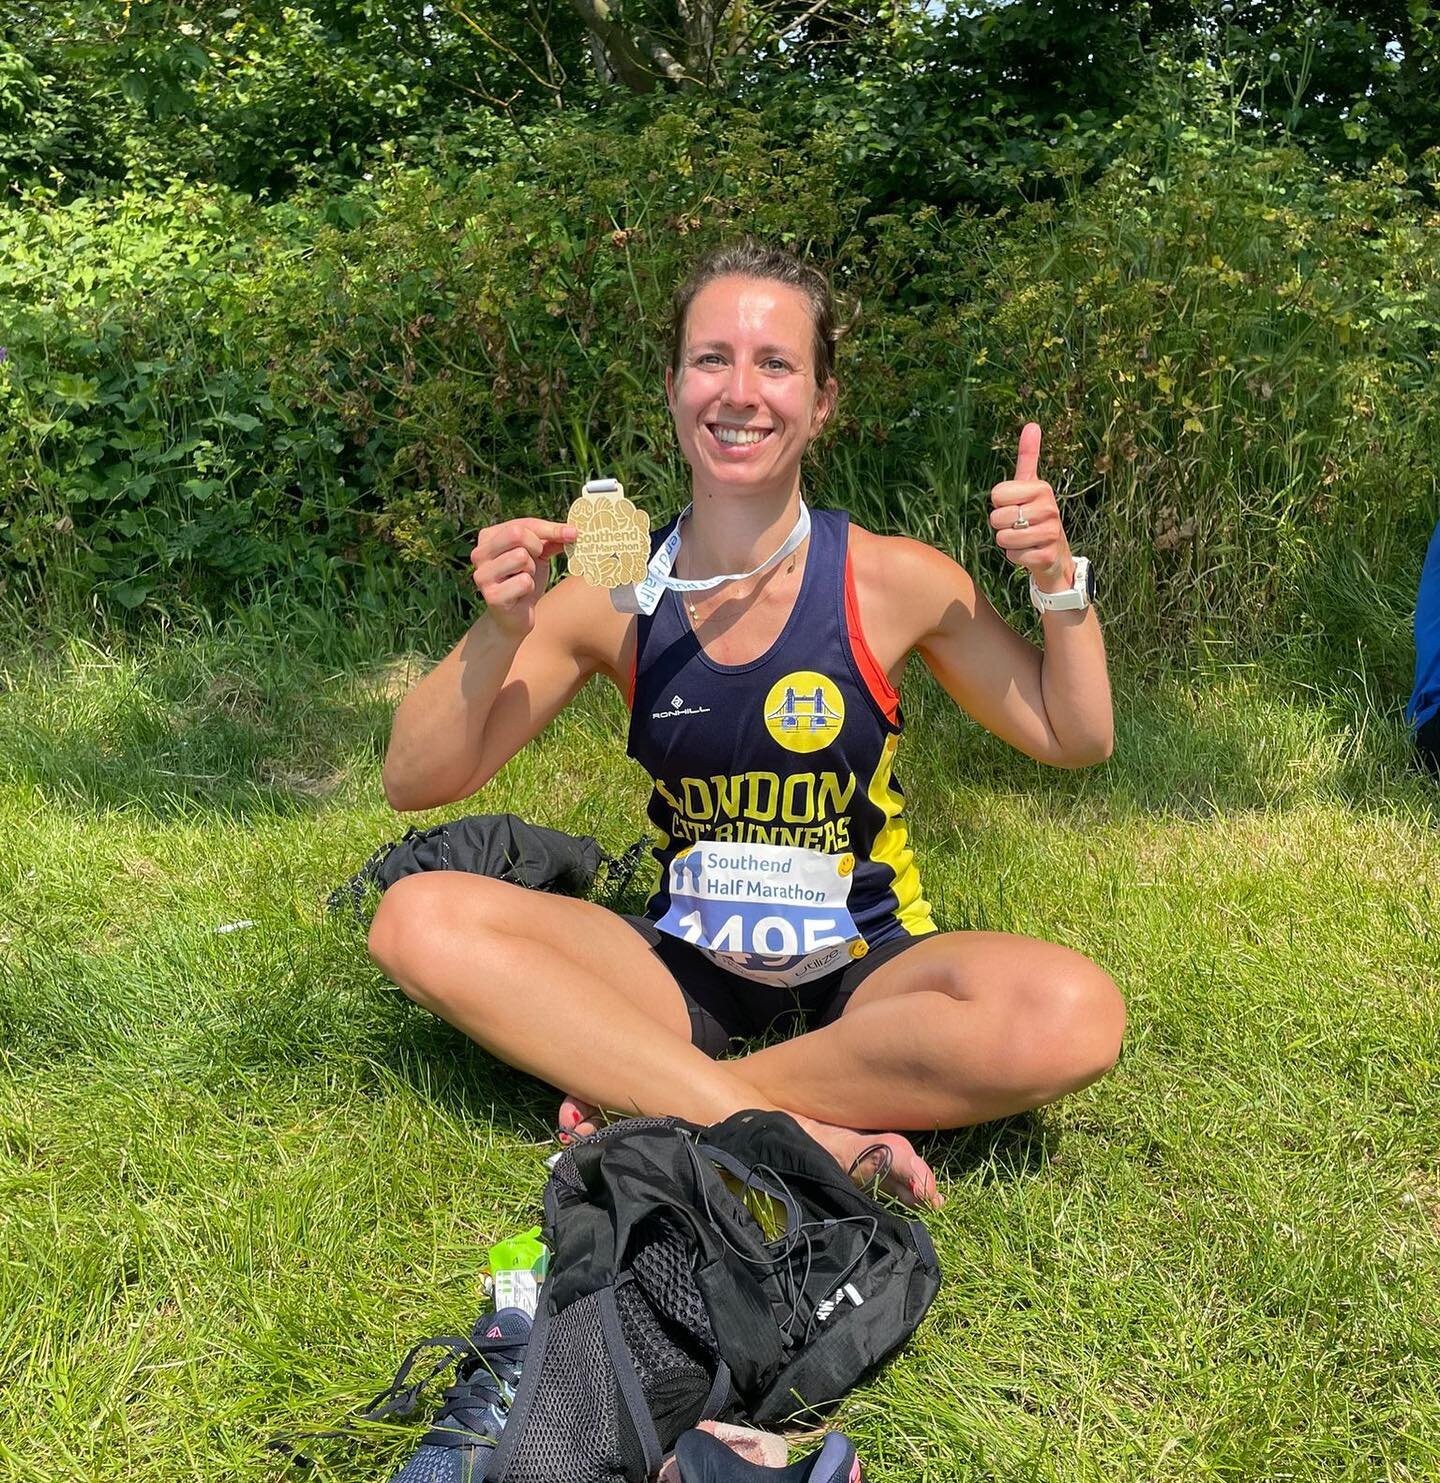 Huge congratulations to Kaja, who finished the Southend on Sea half marathon this weekend in some tough conditions 🥵

When it&rsquo;s this hot, it&rsquo;s not always sensible to push super hard, so we used the race to practice a new fueling strategy